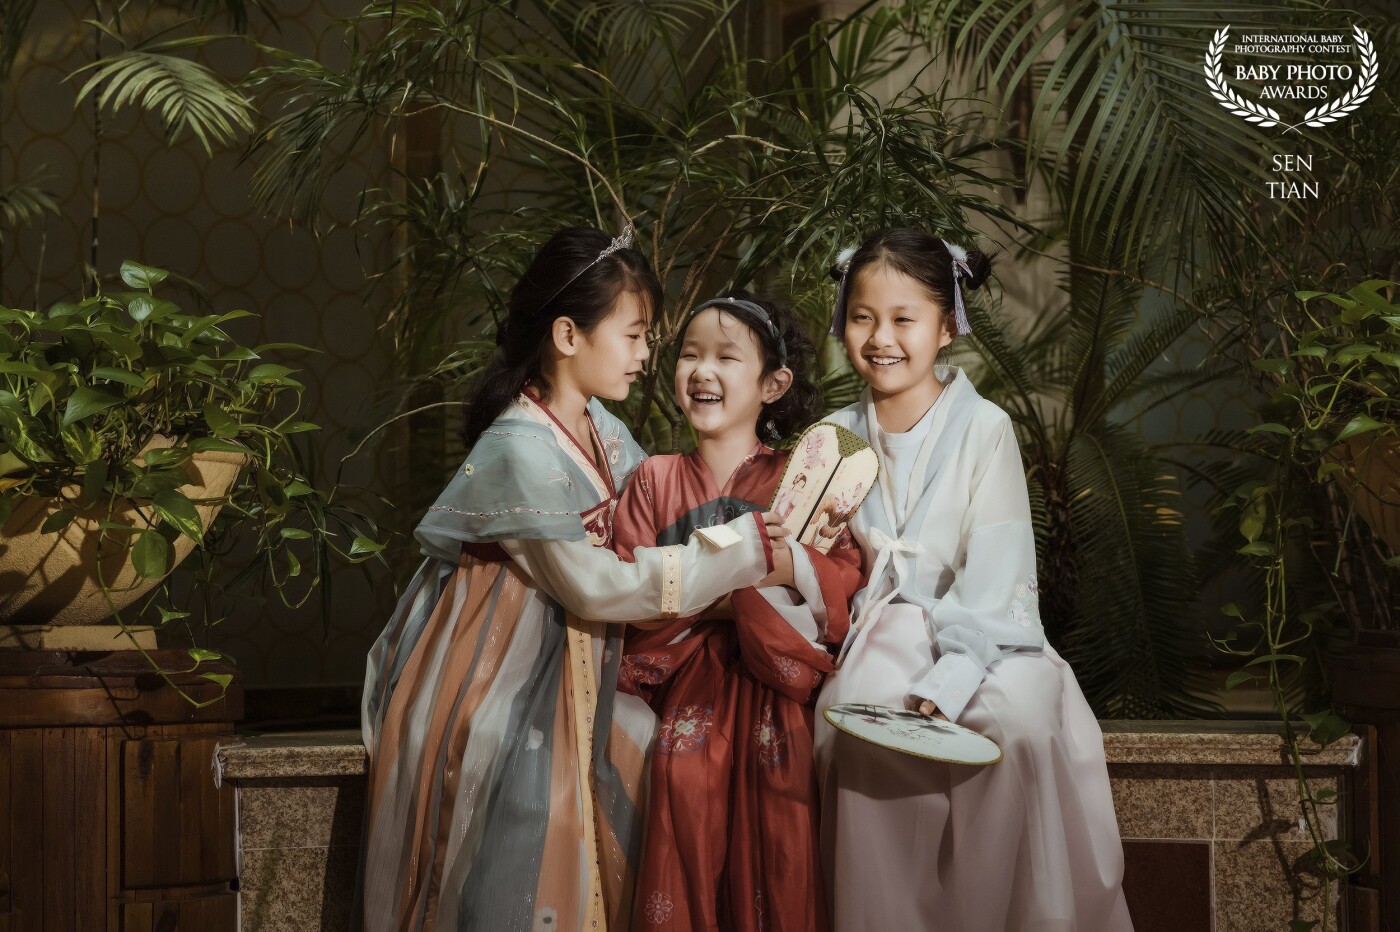 Laugh back to the Tang Dynasty. When girls wear ancient clothes and sit among green plants, they don't care about the photographer. They spend more time laughing and making noise. This is the picture we want.